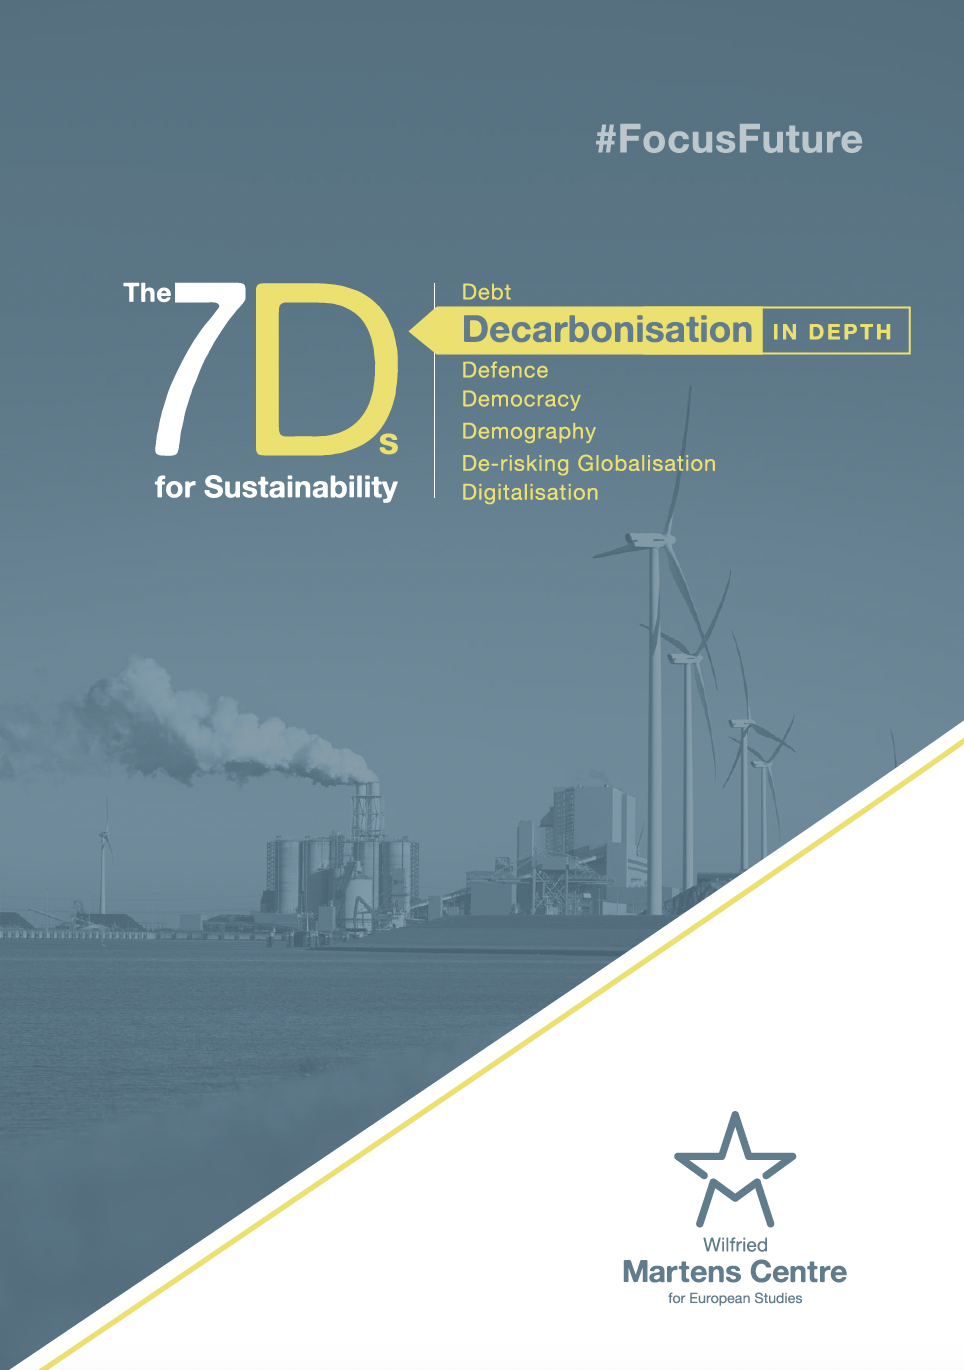 The 7Ds – Decarbonisation in Depth